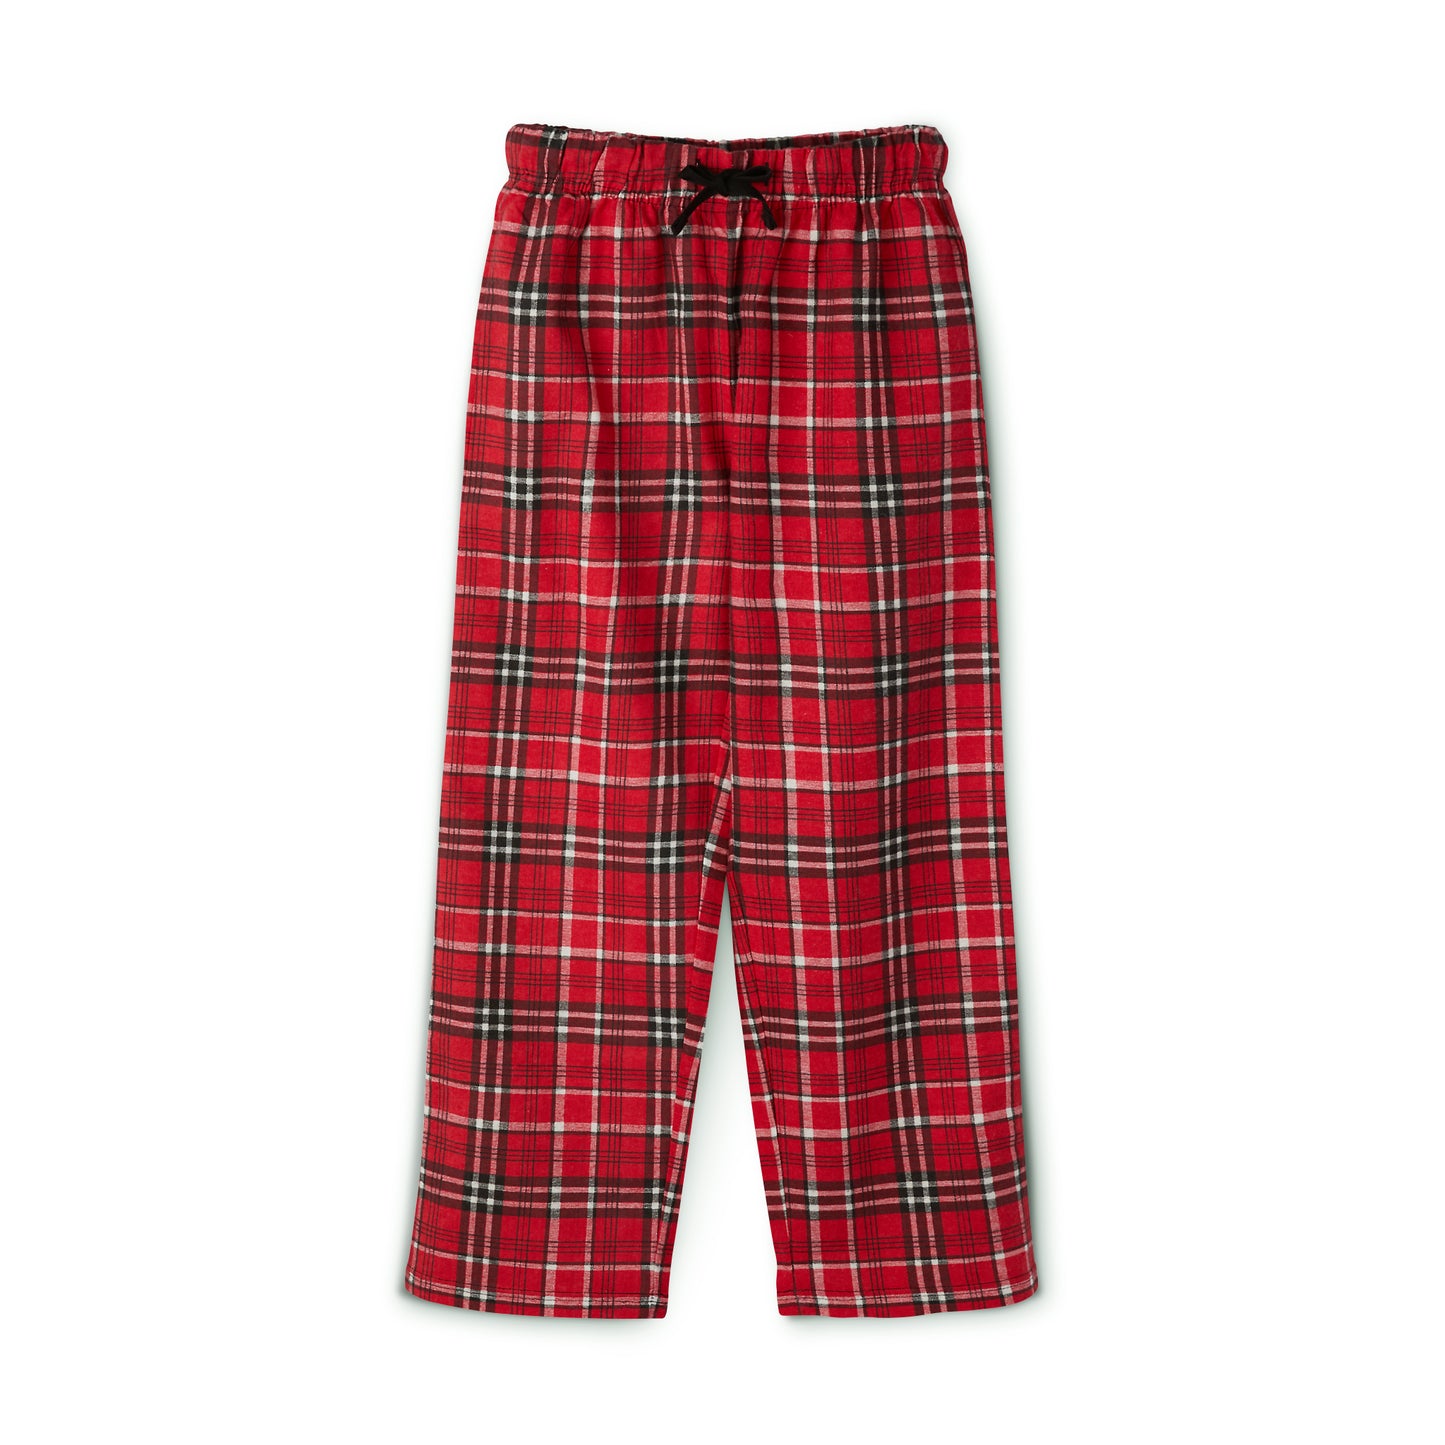 Printify Unisex Youth Holiday Pajamas in red and black plaid, made from 100% cotton.